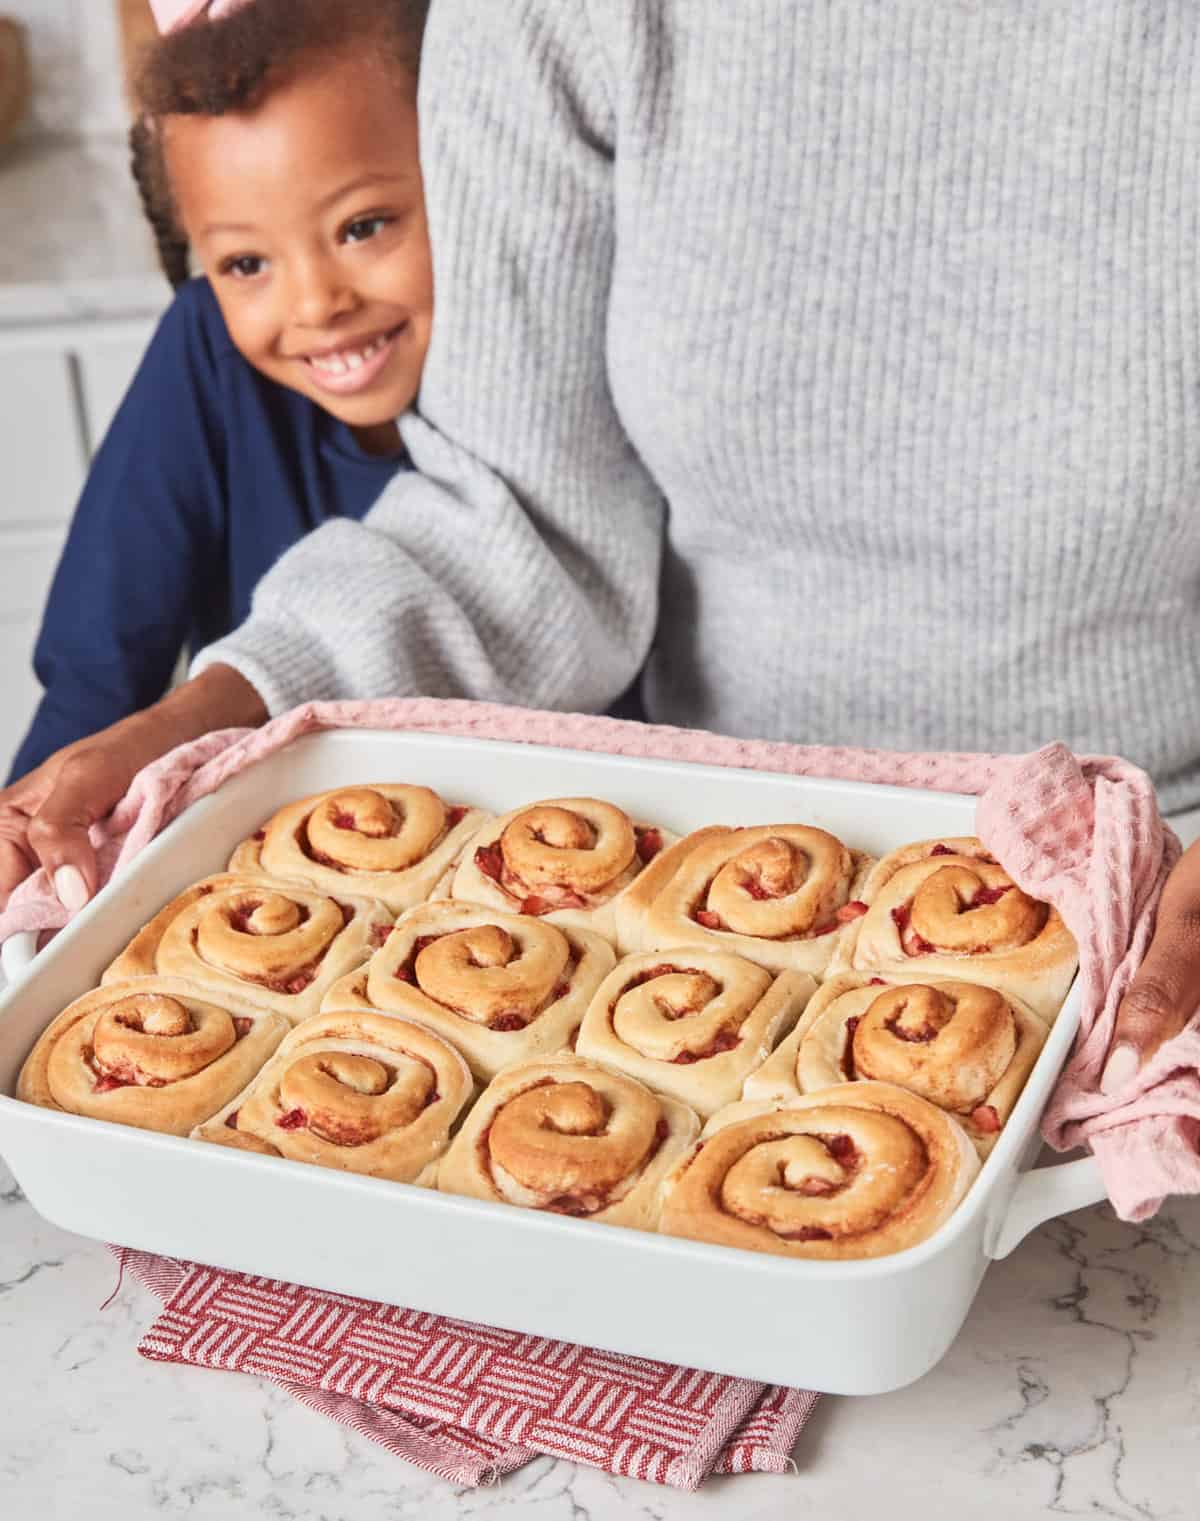 Daughter looking at a pan of cinnamon rolls in a white dish.